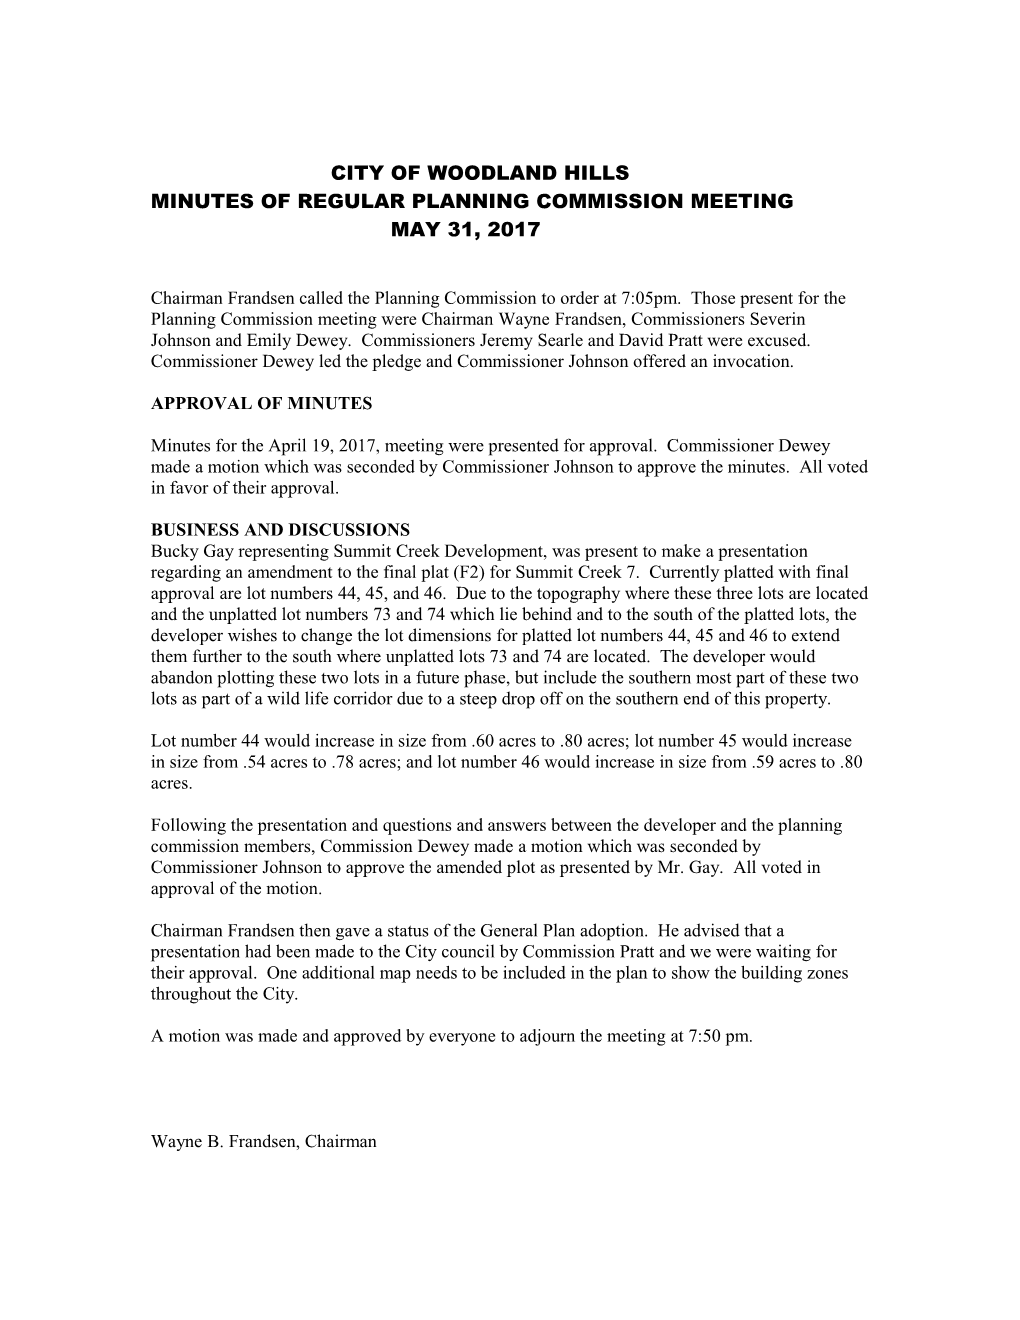 Minutes of Regular Planning Commission Meeting